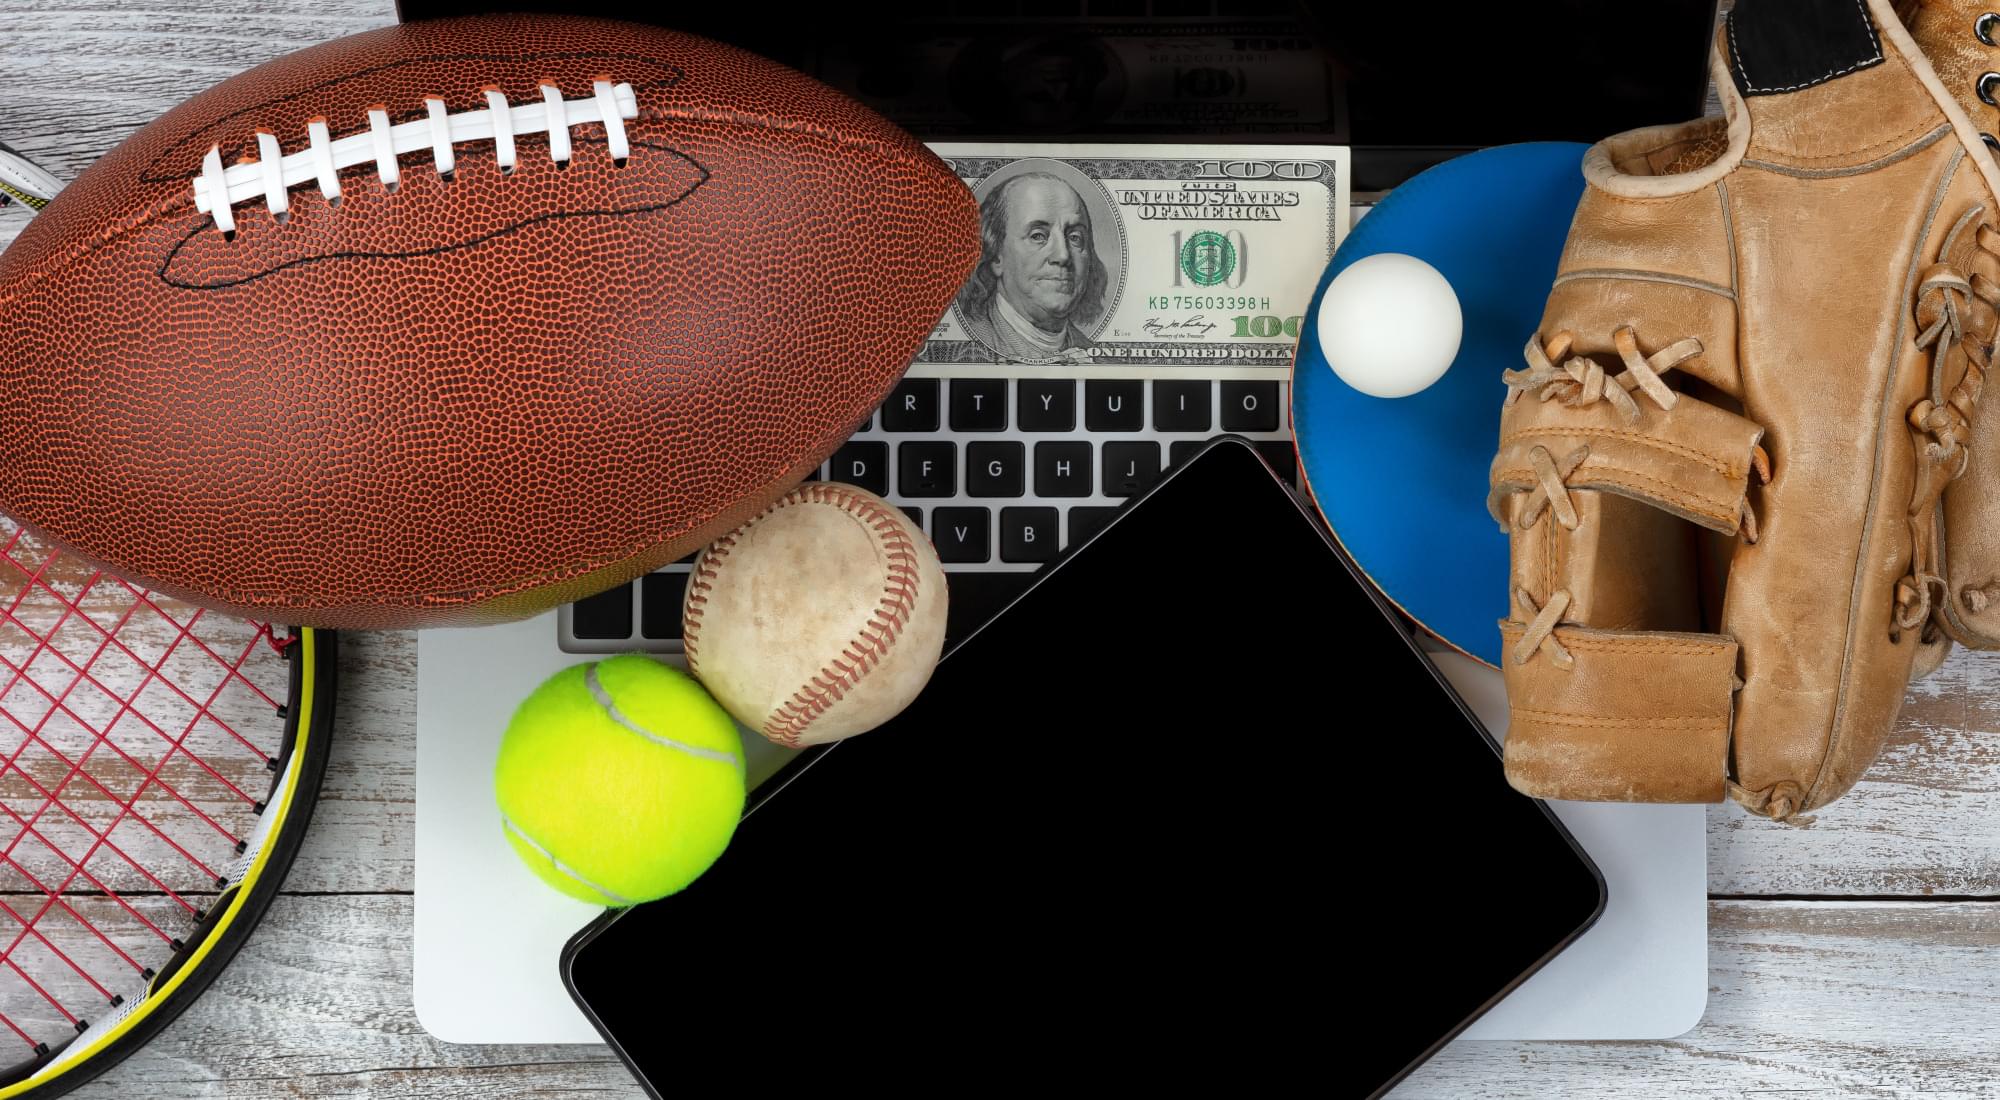 A generic image related to sports betting on the computer